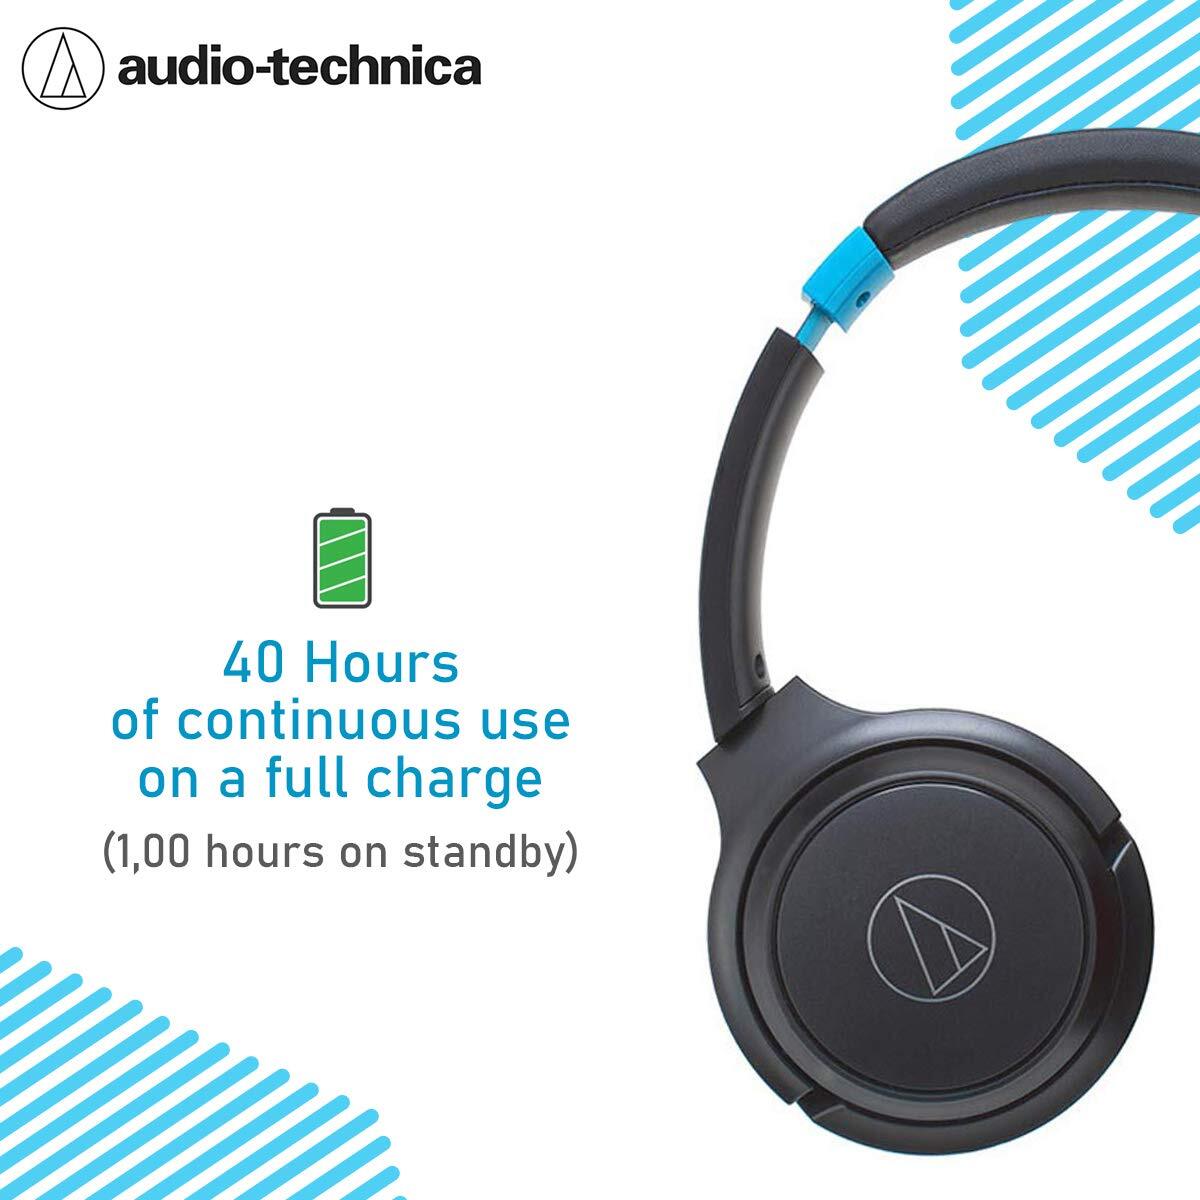 Audio-Technica ATH-S200BTGBL Bluetooth Wireless On-Ear Headphones with Built-in Mic & Controls, Gray/Blue